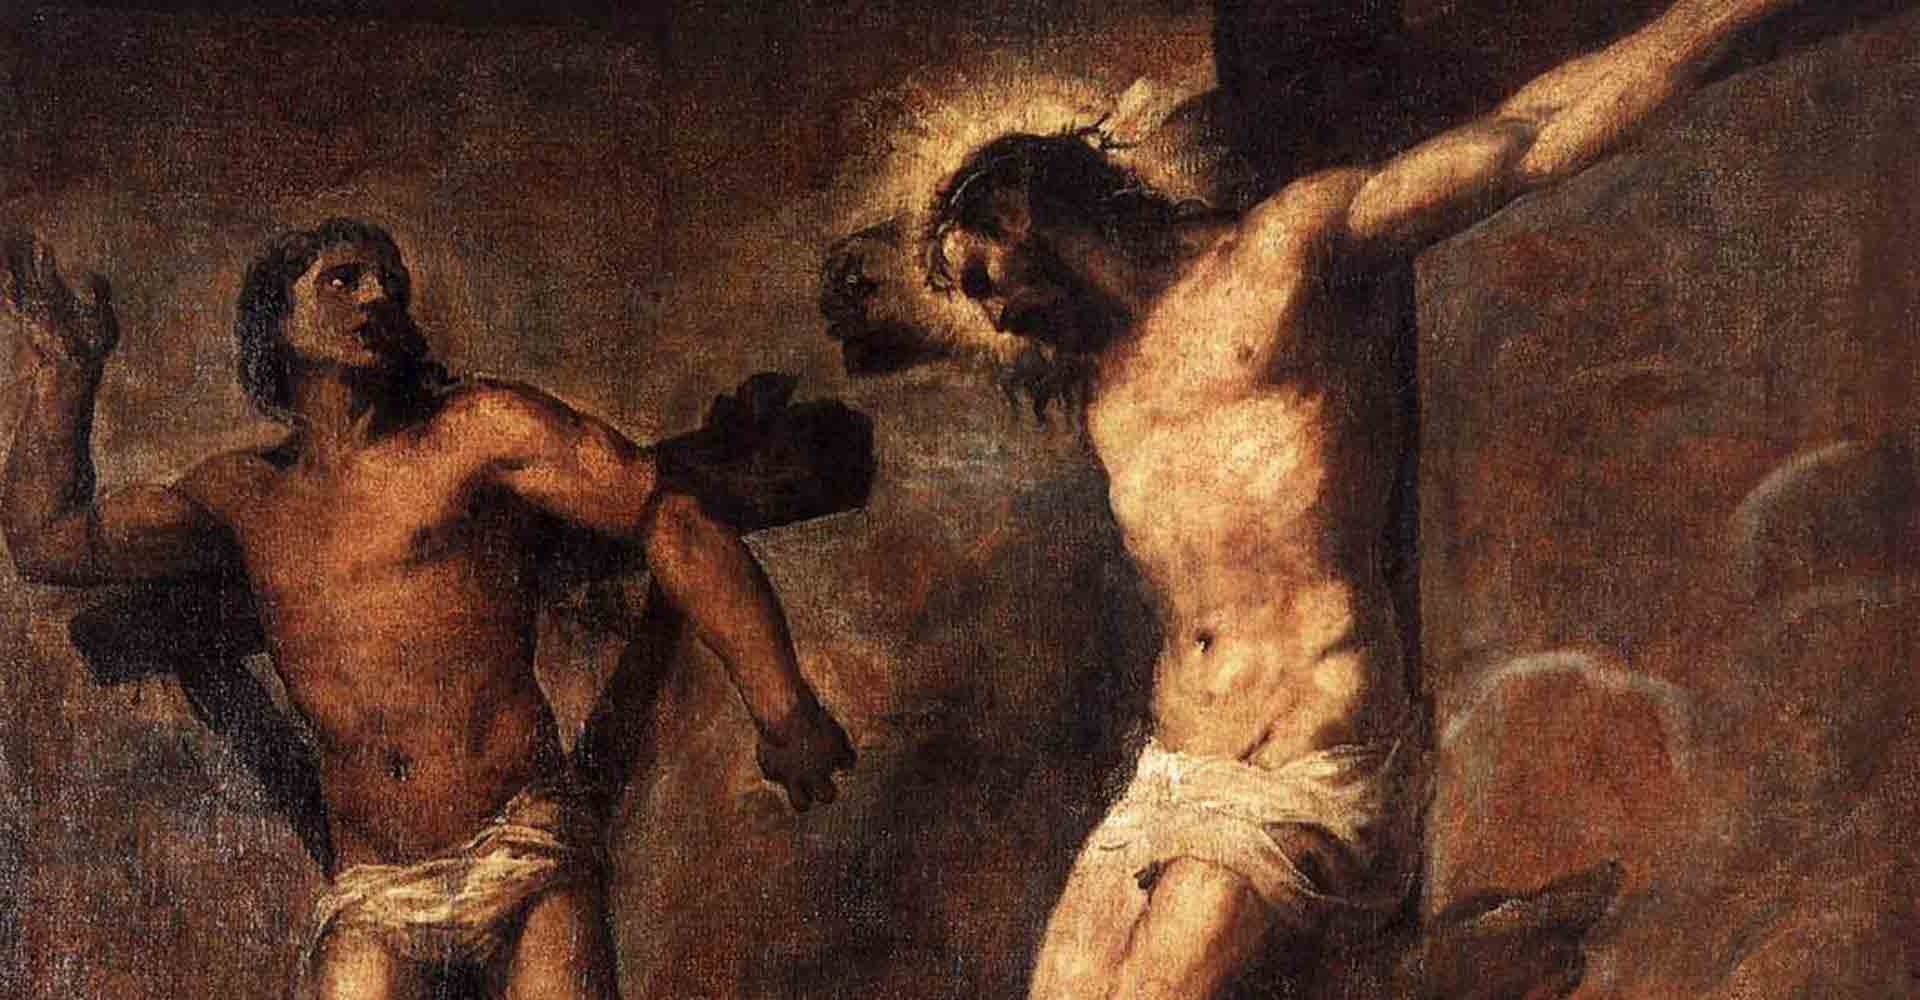 Christ and the good thief